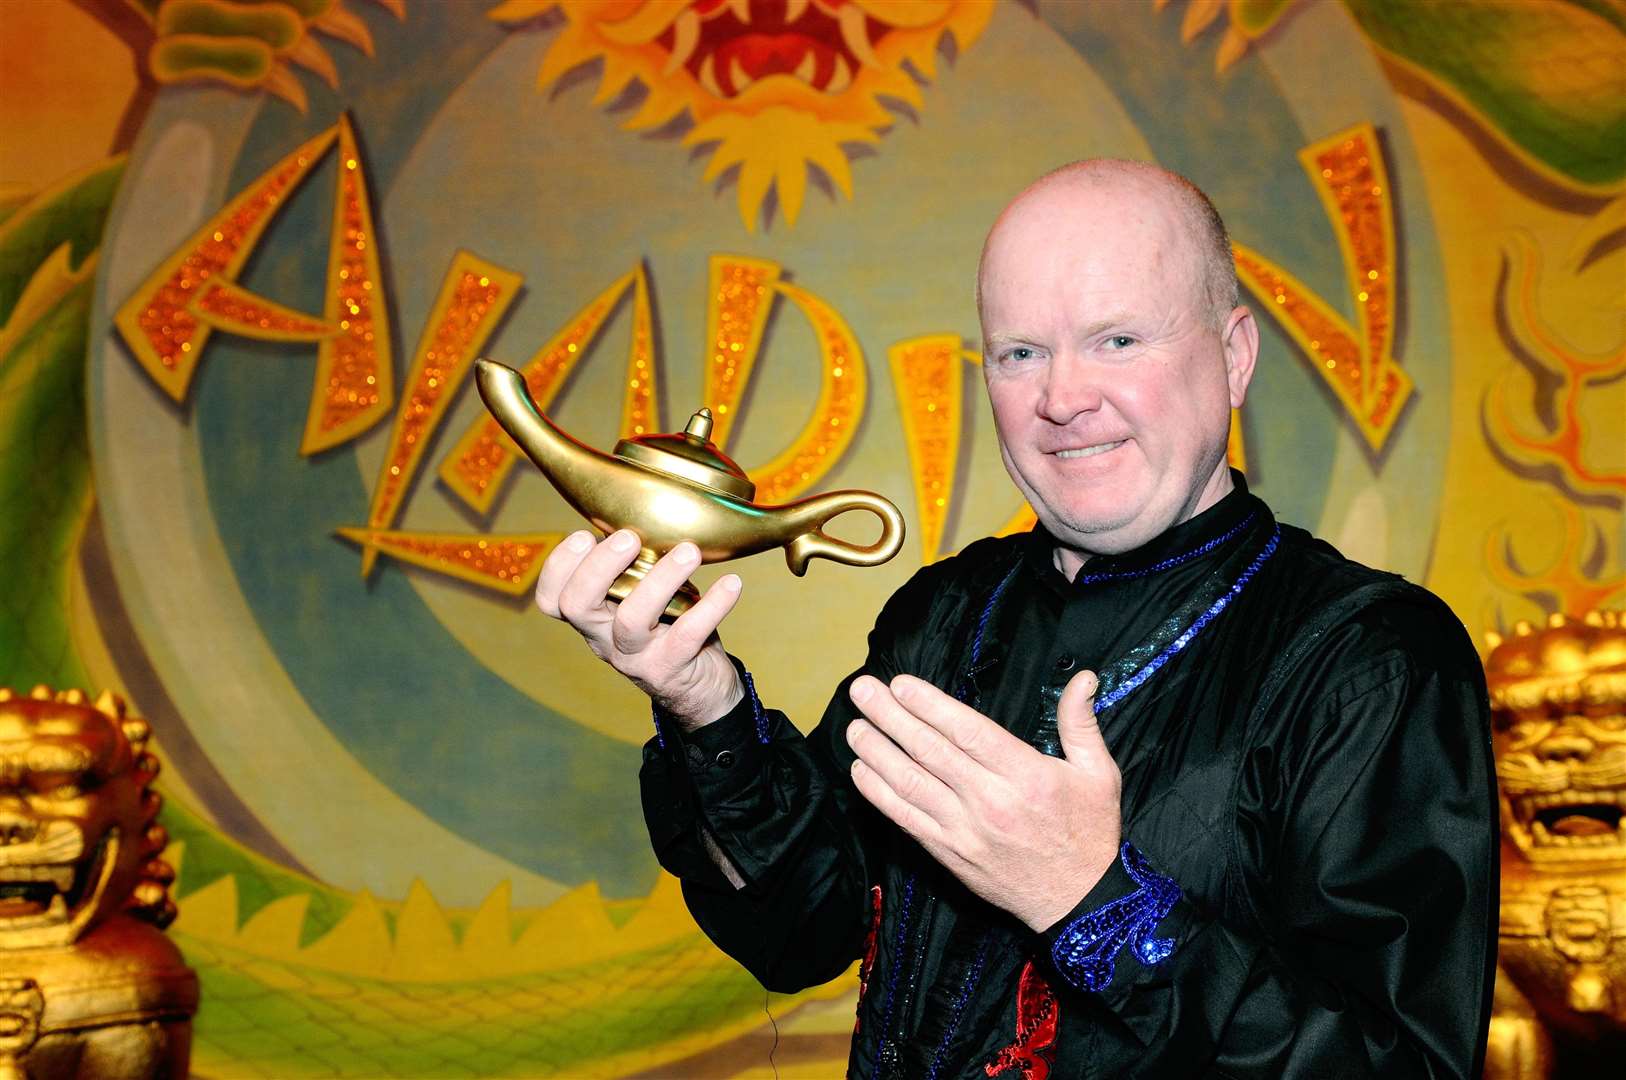 Steve McFadden is one of very many soap stars to strut their stuff